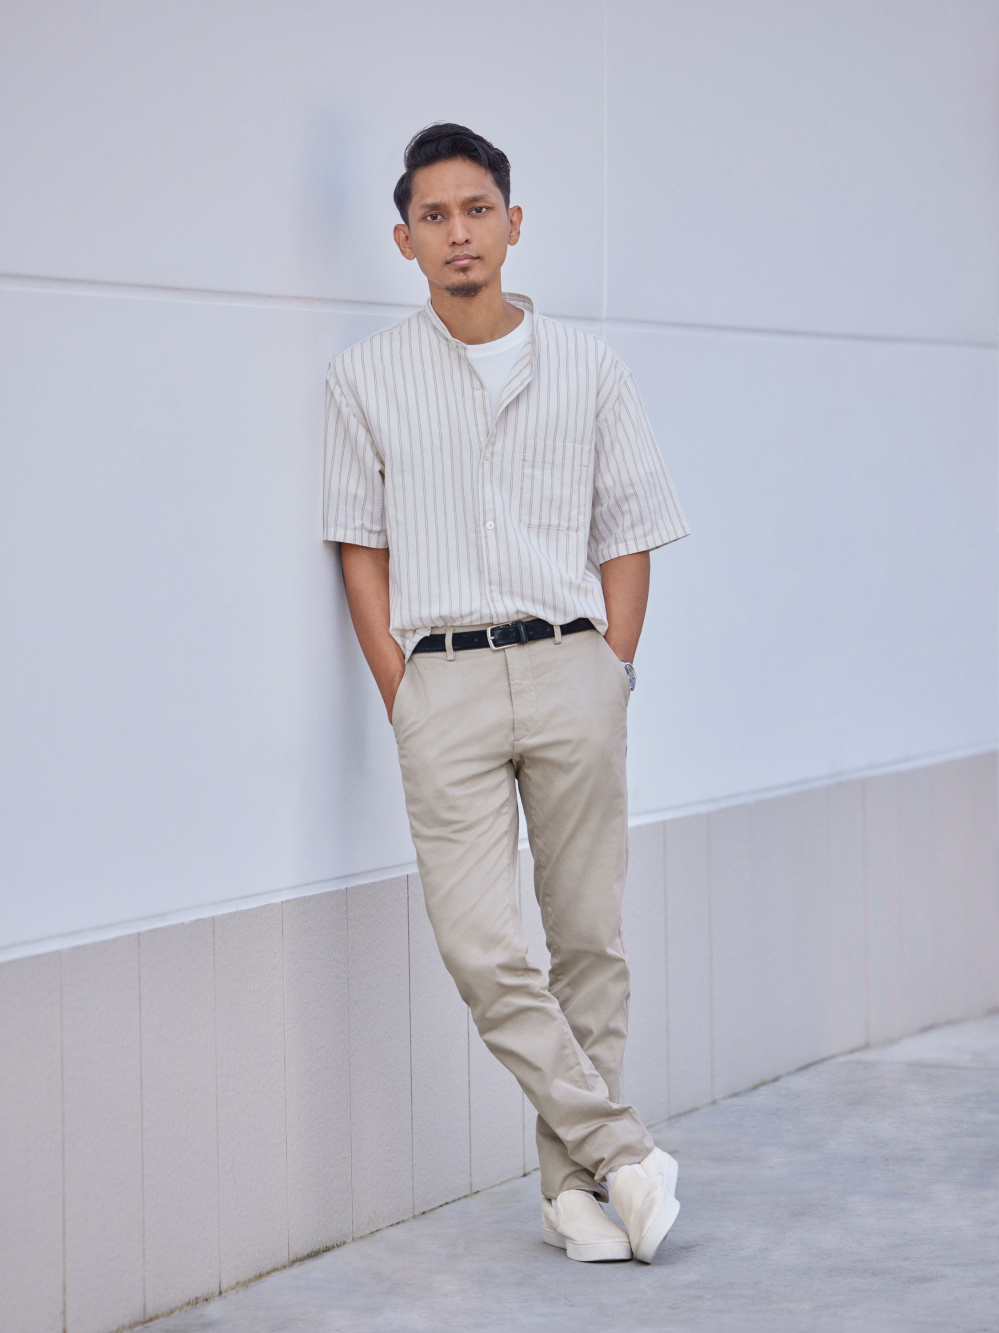 Khaki Dress Pants with White Crew-neck T-shirt Outfits For Men (41 ideas &  outfits)